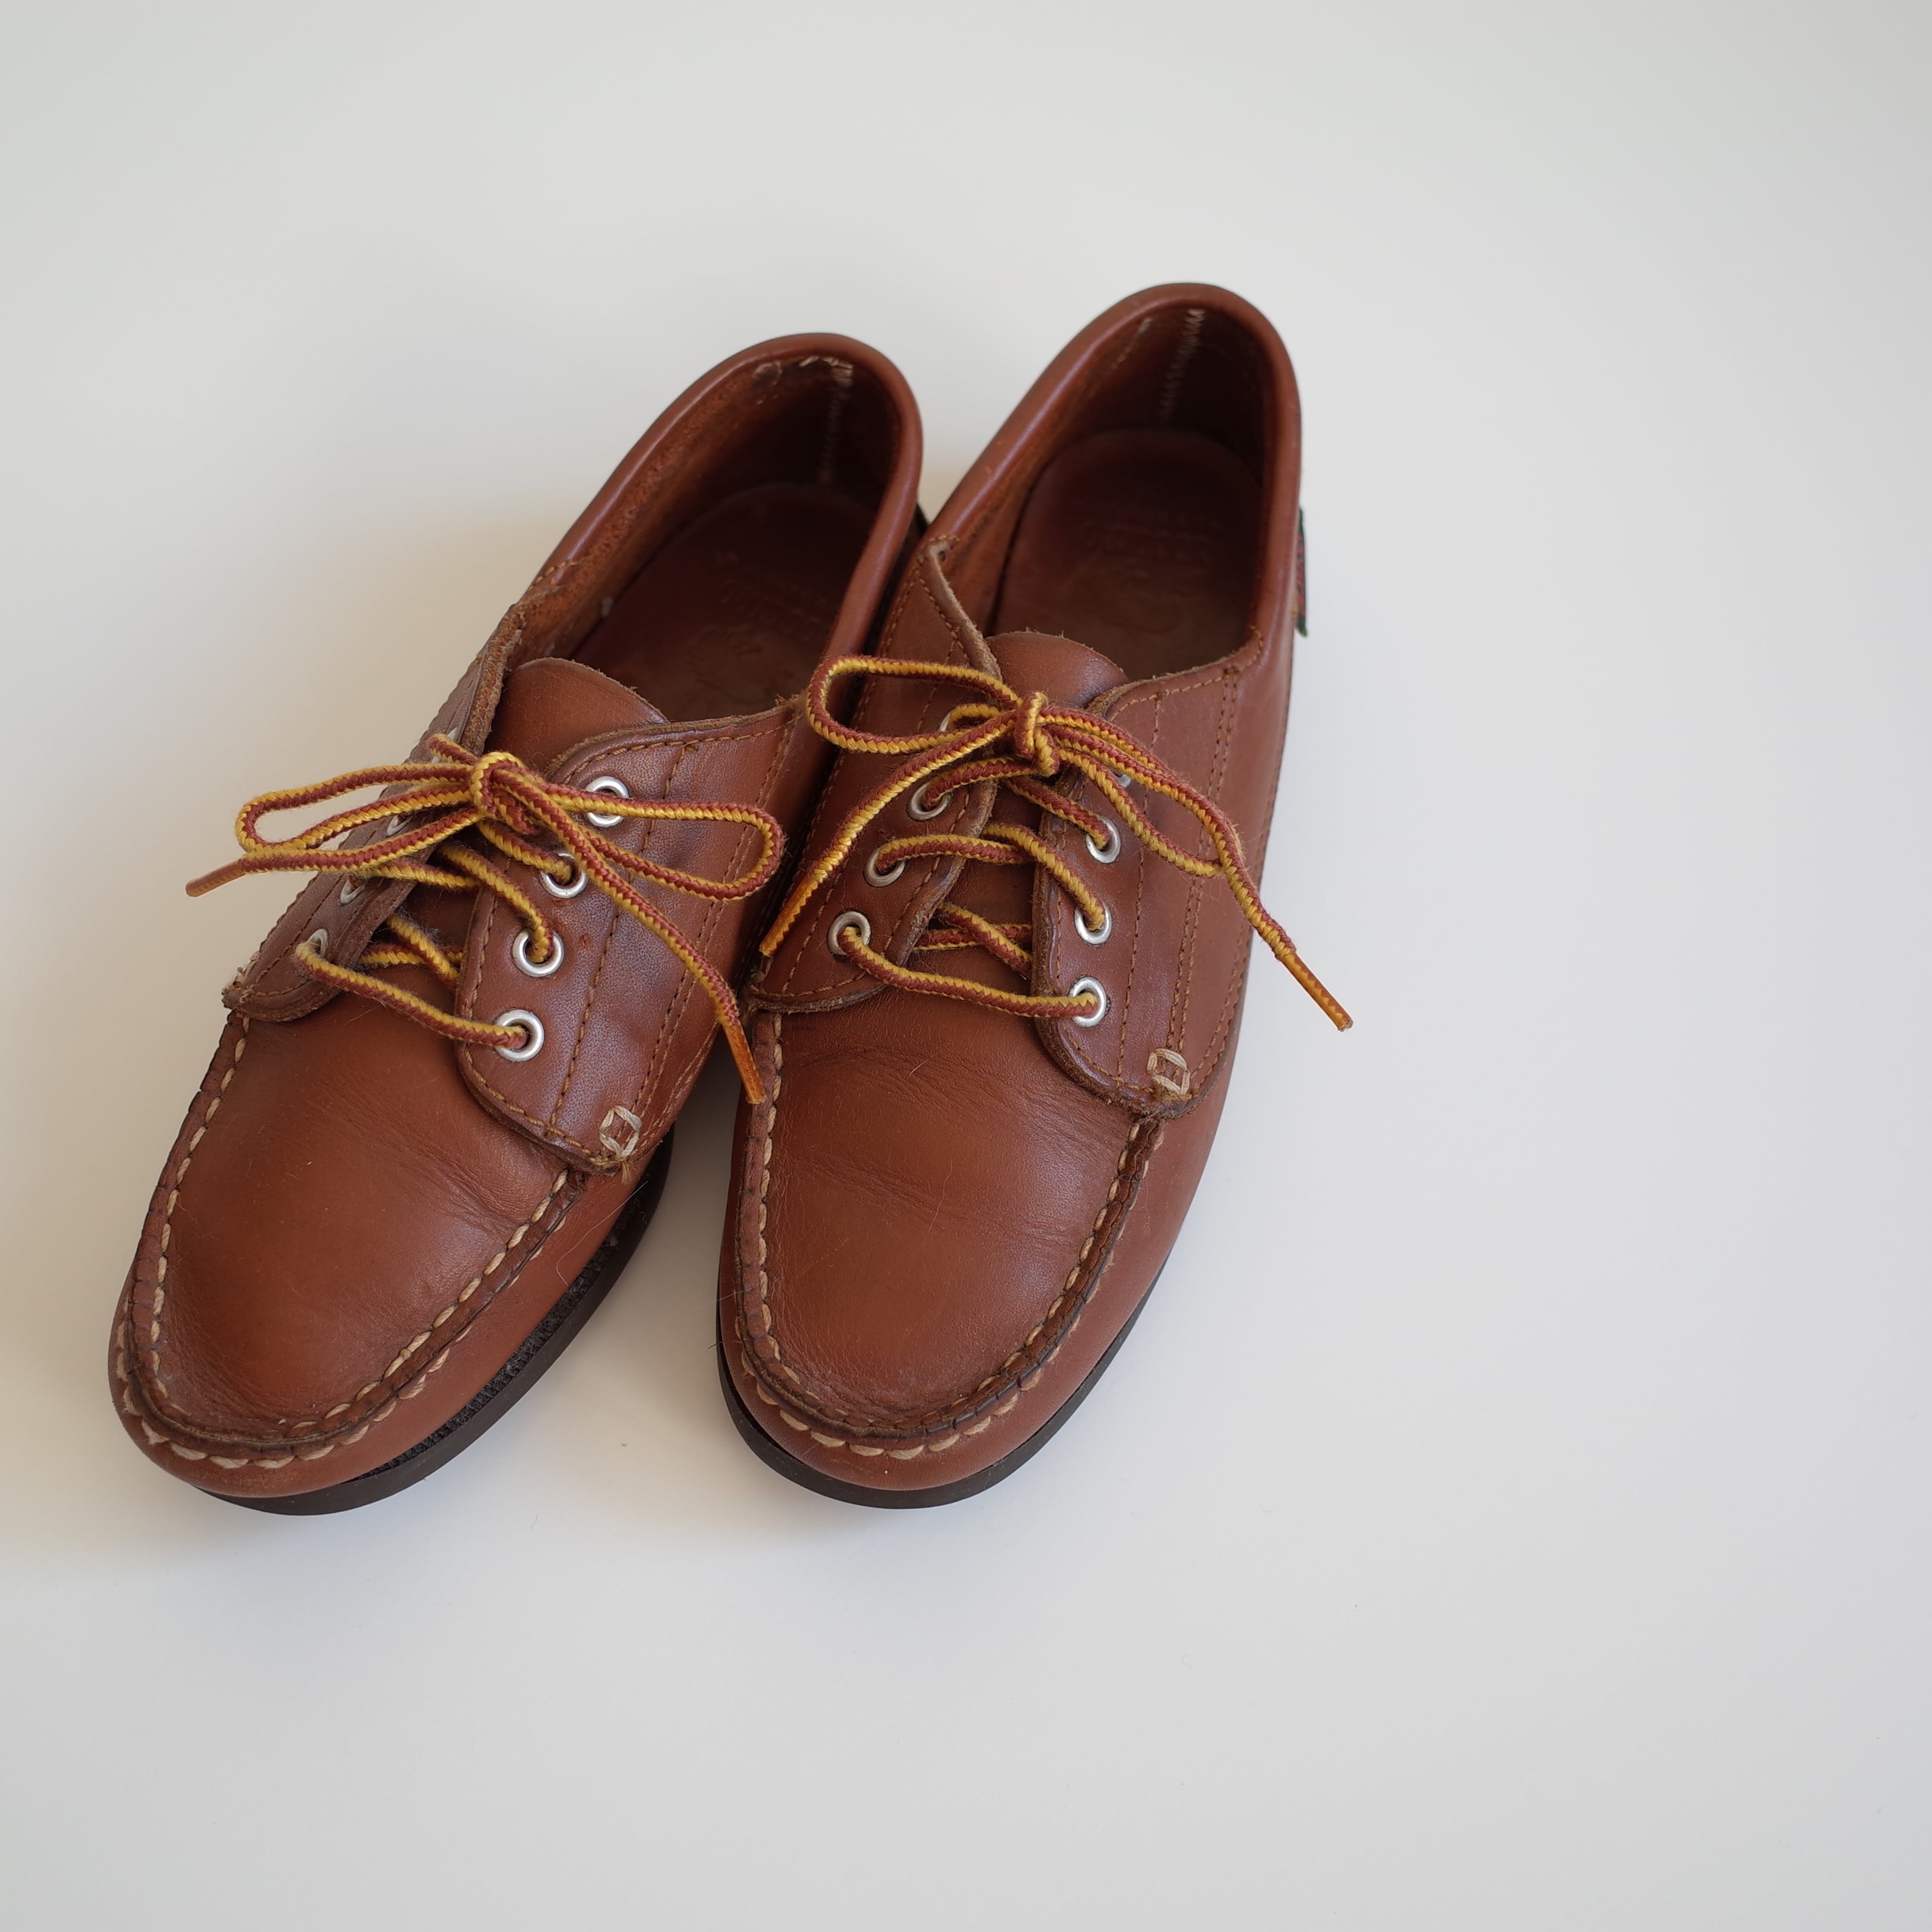 G.H.BASS leather deck shoes | select zakka & vintage clothing port.